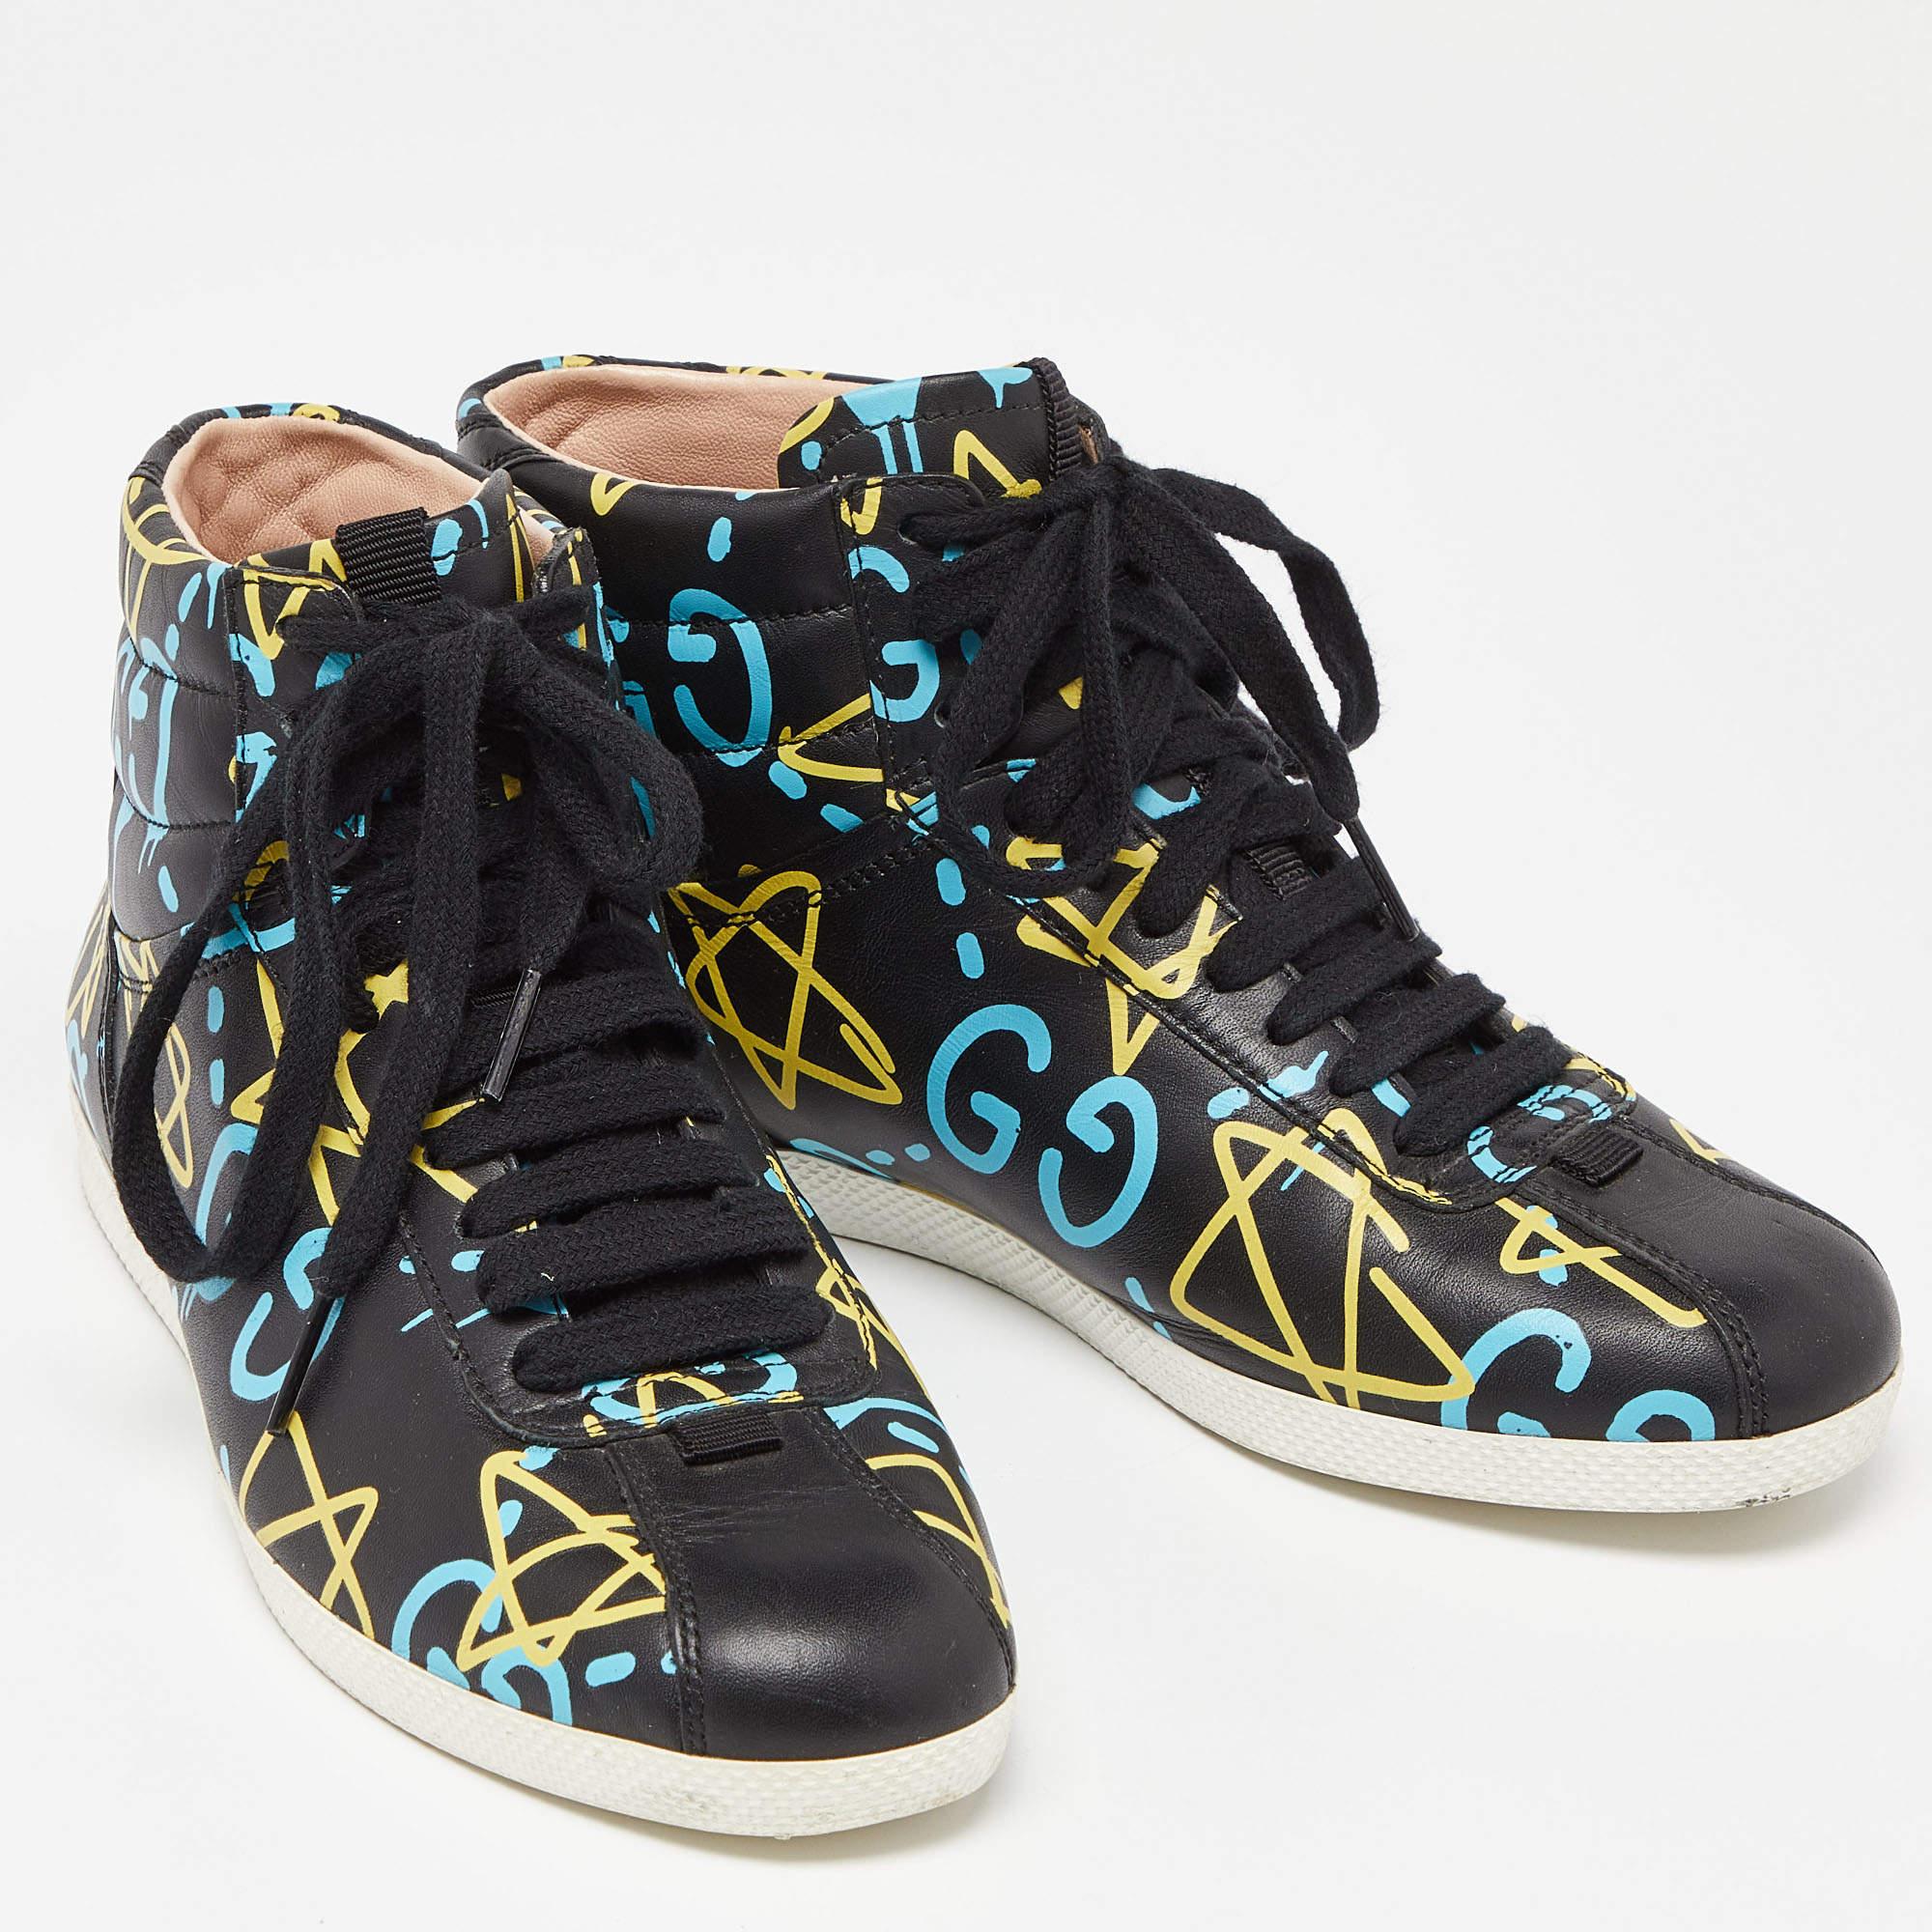 Gucci Black Graffiti Leather Ghost High Top Sneakers Size 35.5 For Sale 1